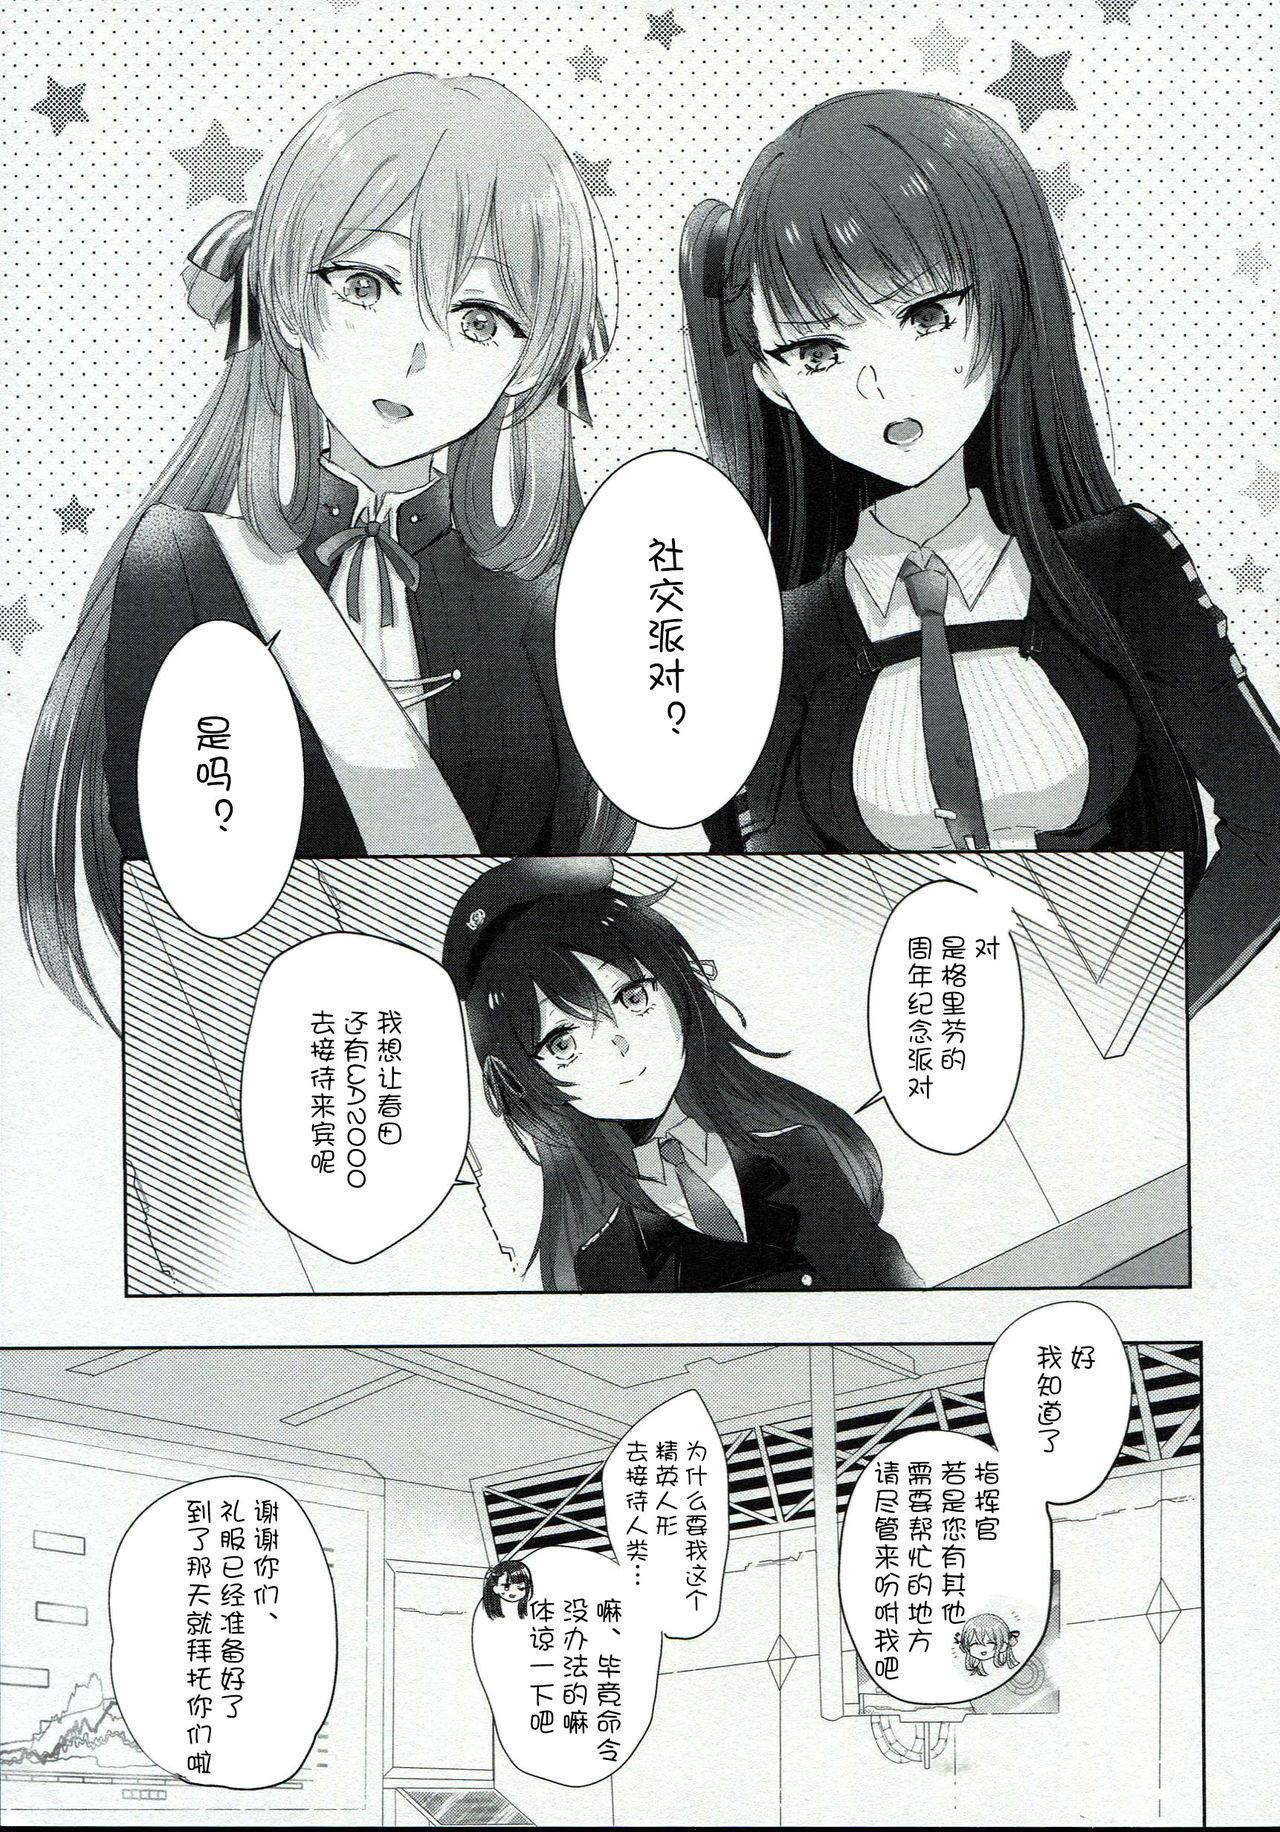 Blowing Alcohol wa Amai - Girls frontline Officesex - Page 3